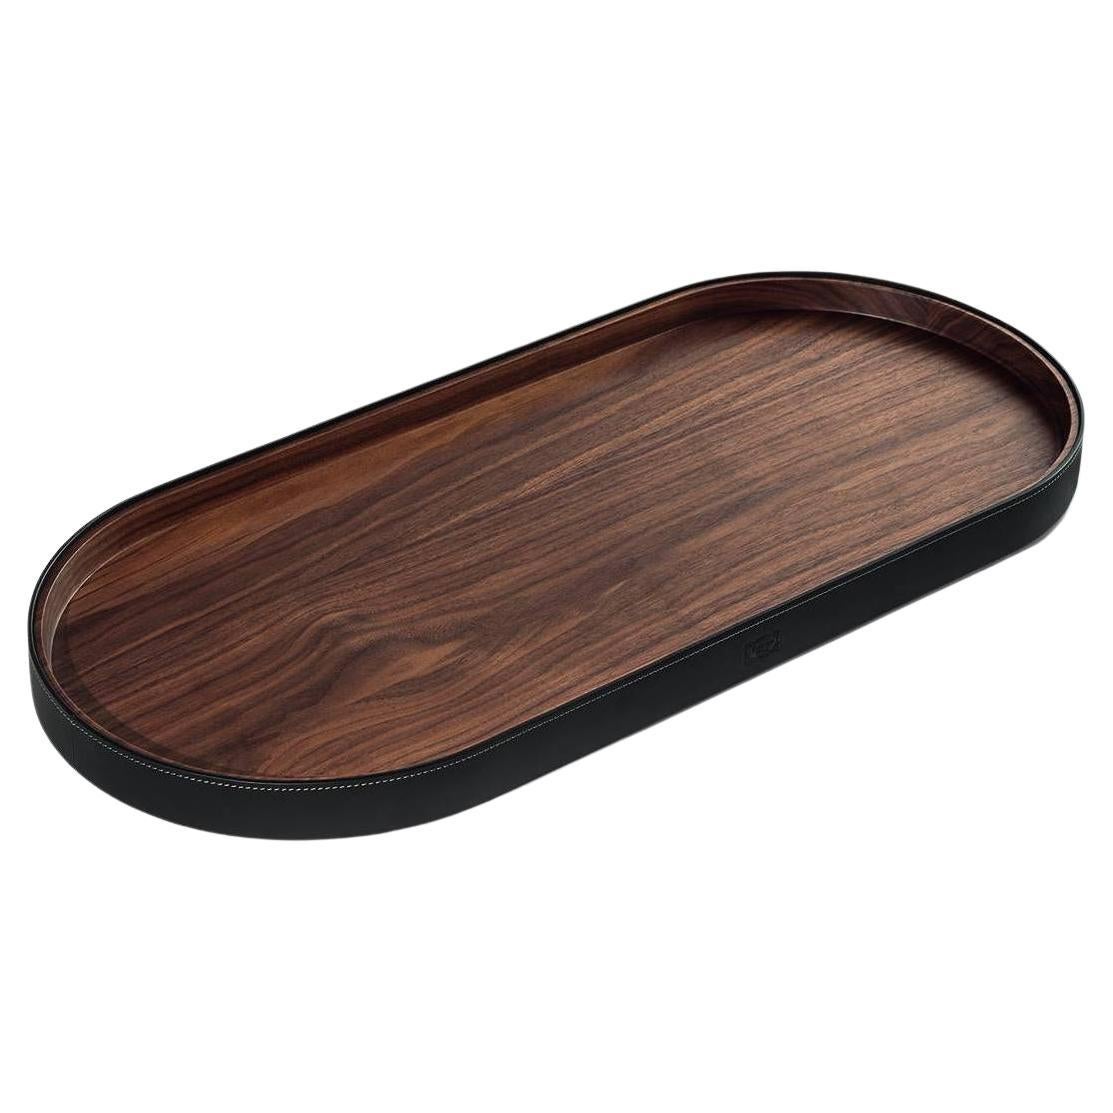 Zhuang, Oval Tray in Saddle Extra Leather Carbon